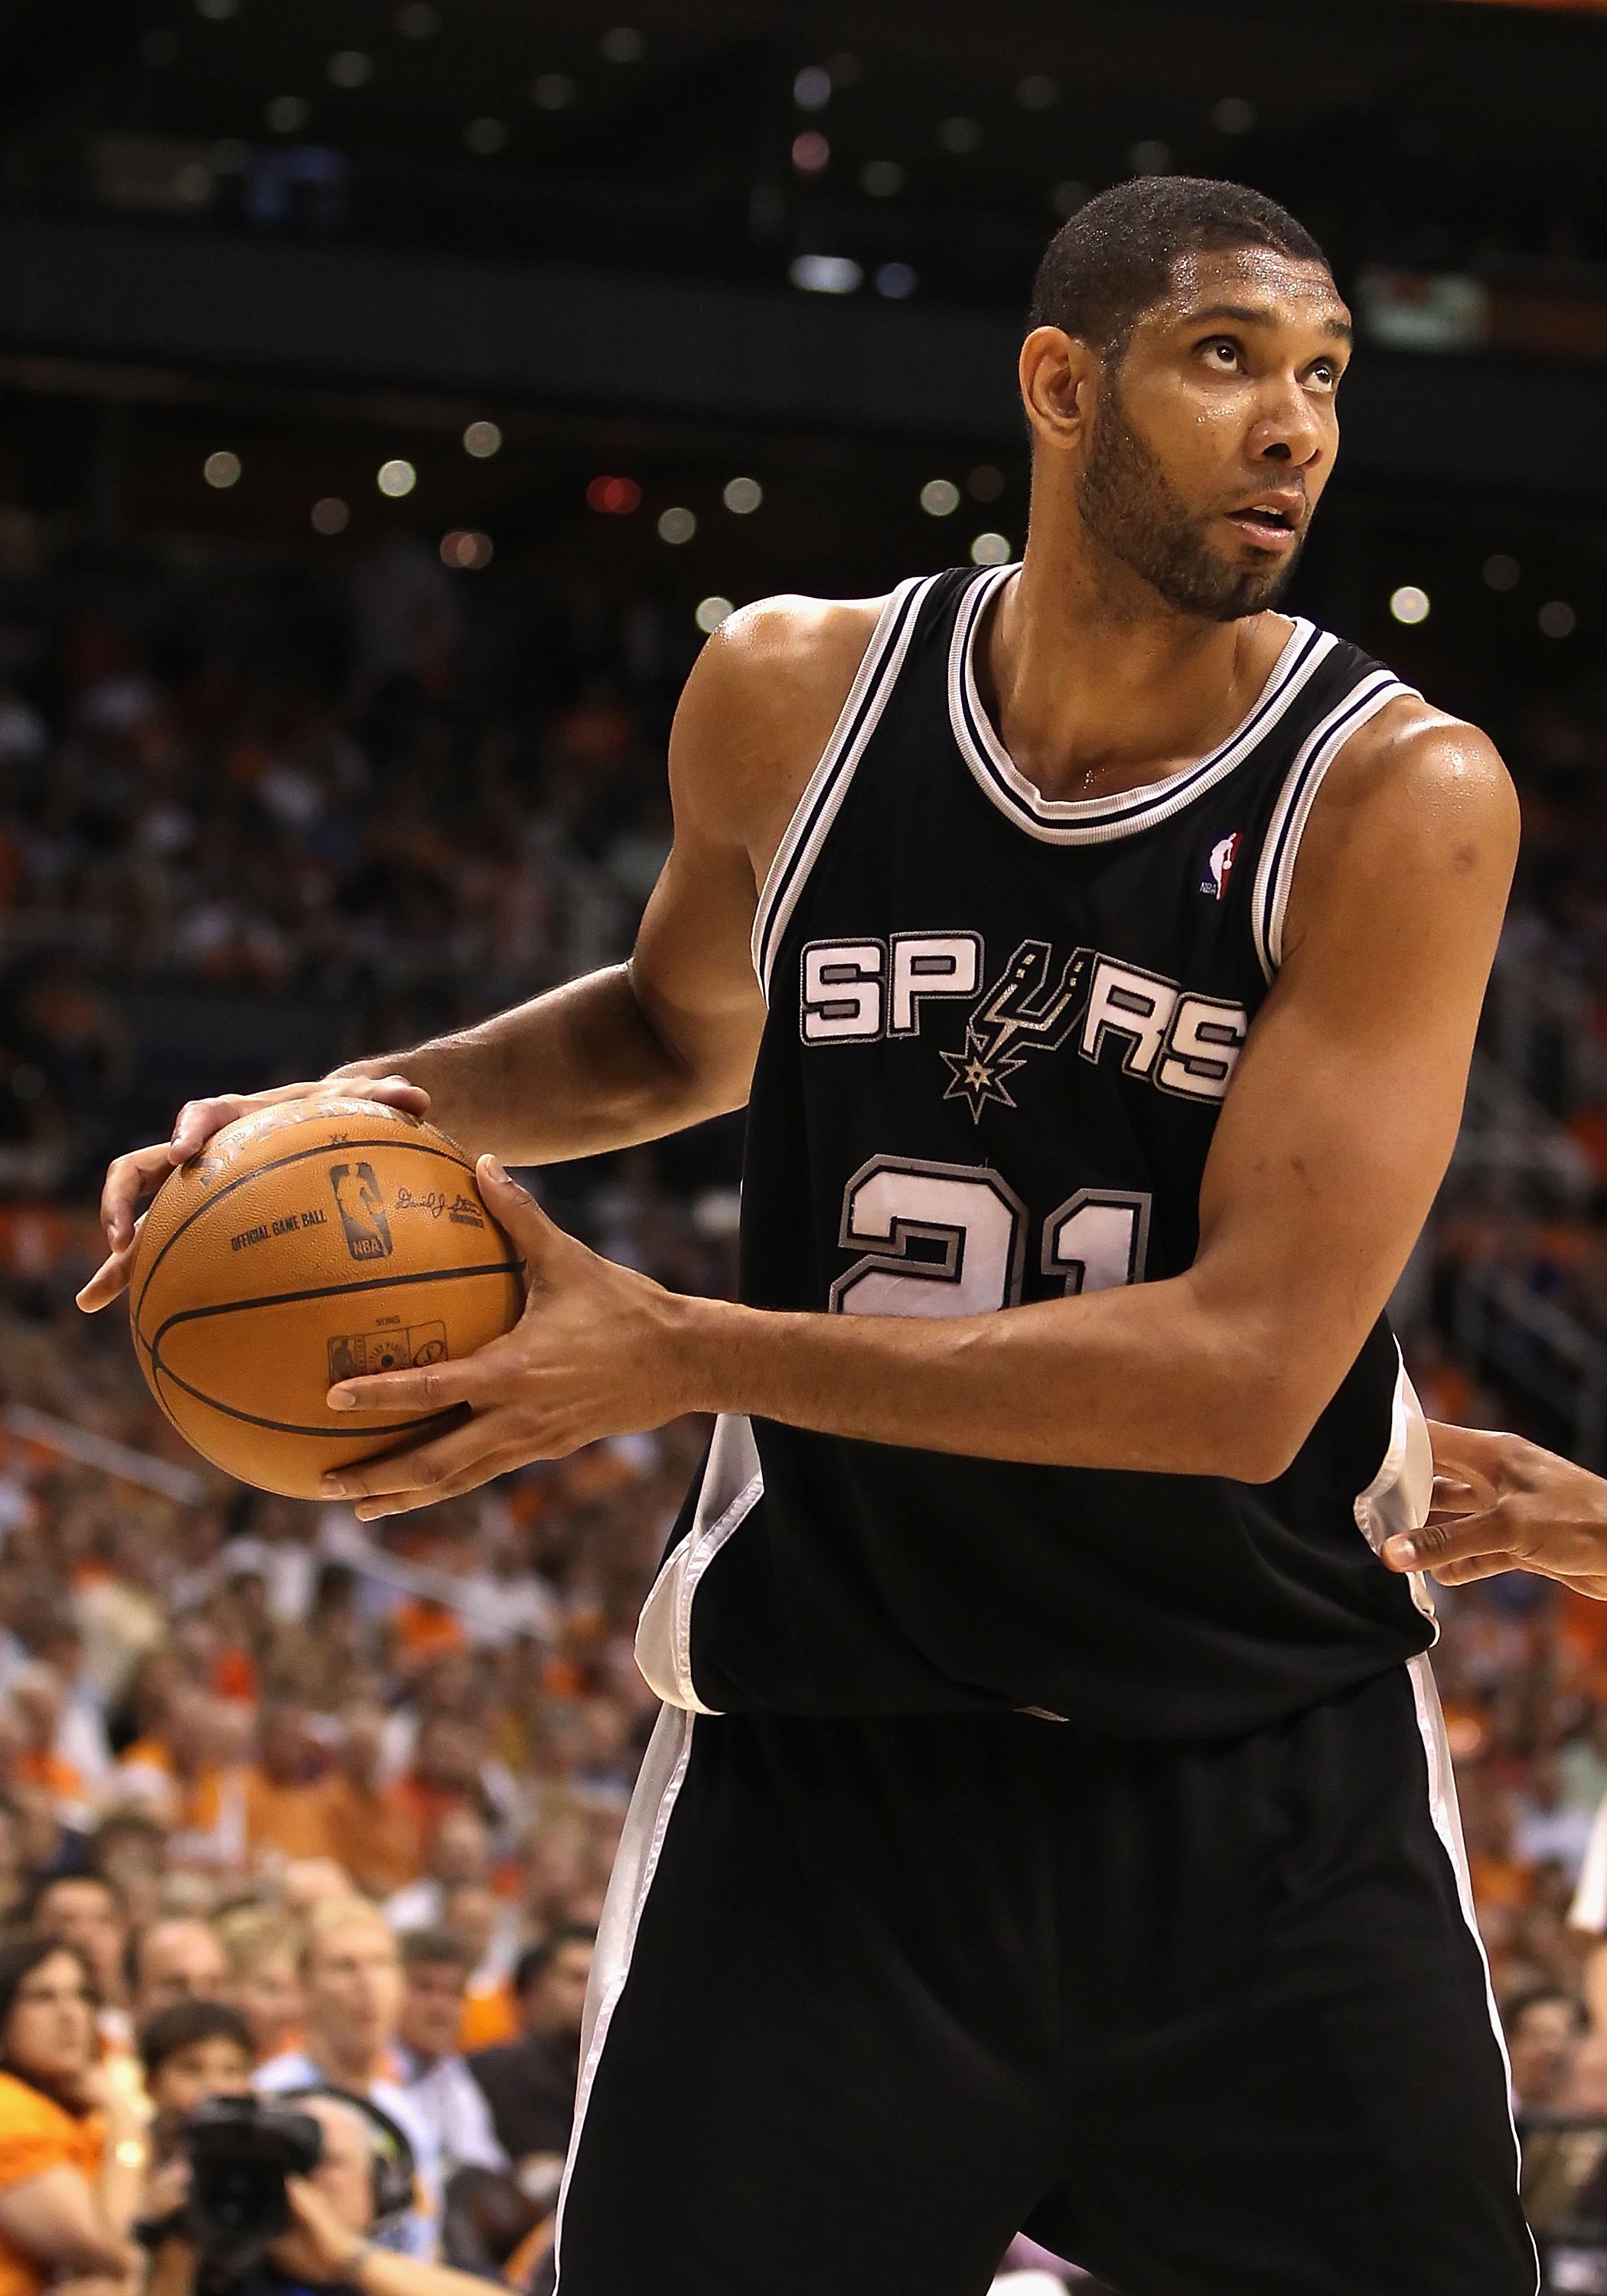 PHOENIX - MAY 05:  Tim Duncan #21 of the San Antonio Spurs handles the ball during Game Two of the Western Conference Semifinals of the 2010 NBA Playoffs against the Phoenix Suns at US Airways Center on May 5, 2010 in Phoenix, Arizona. The team is wearing